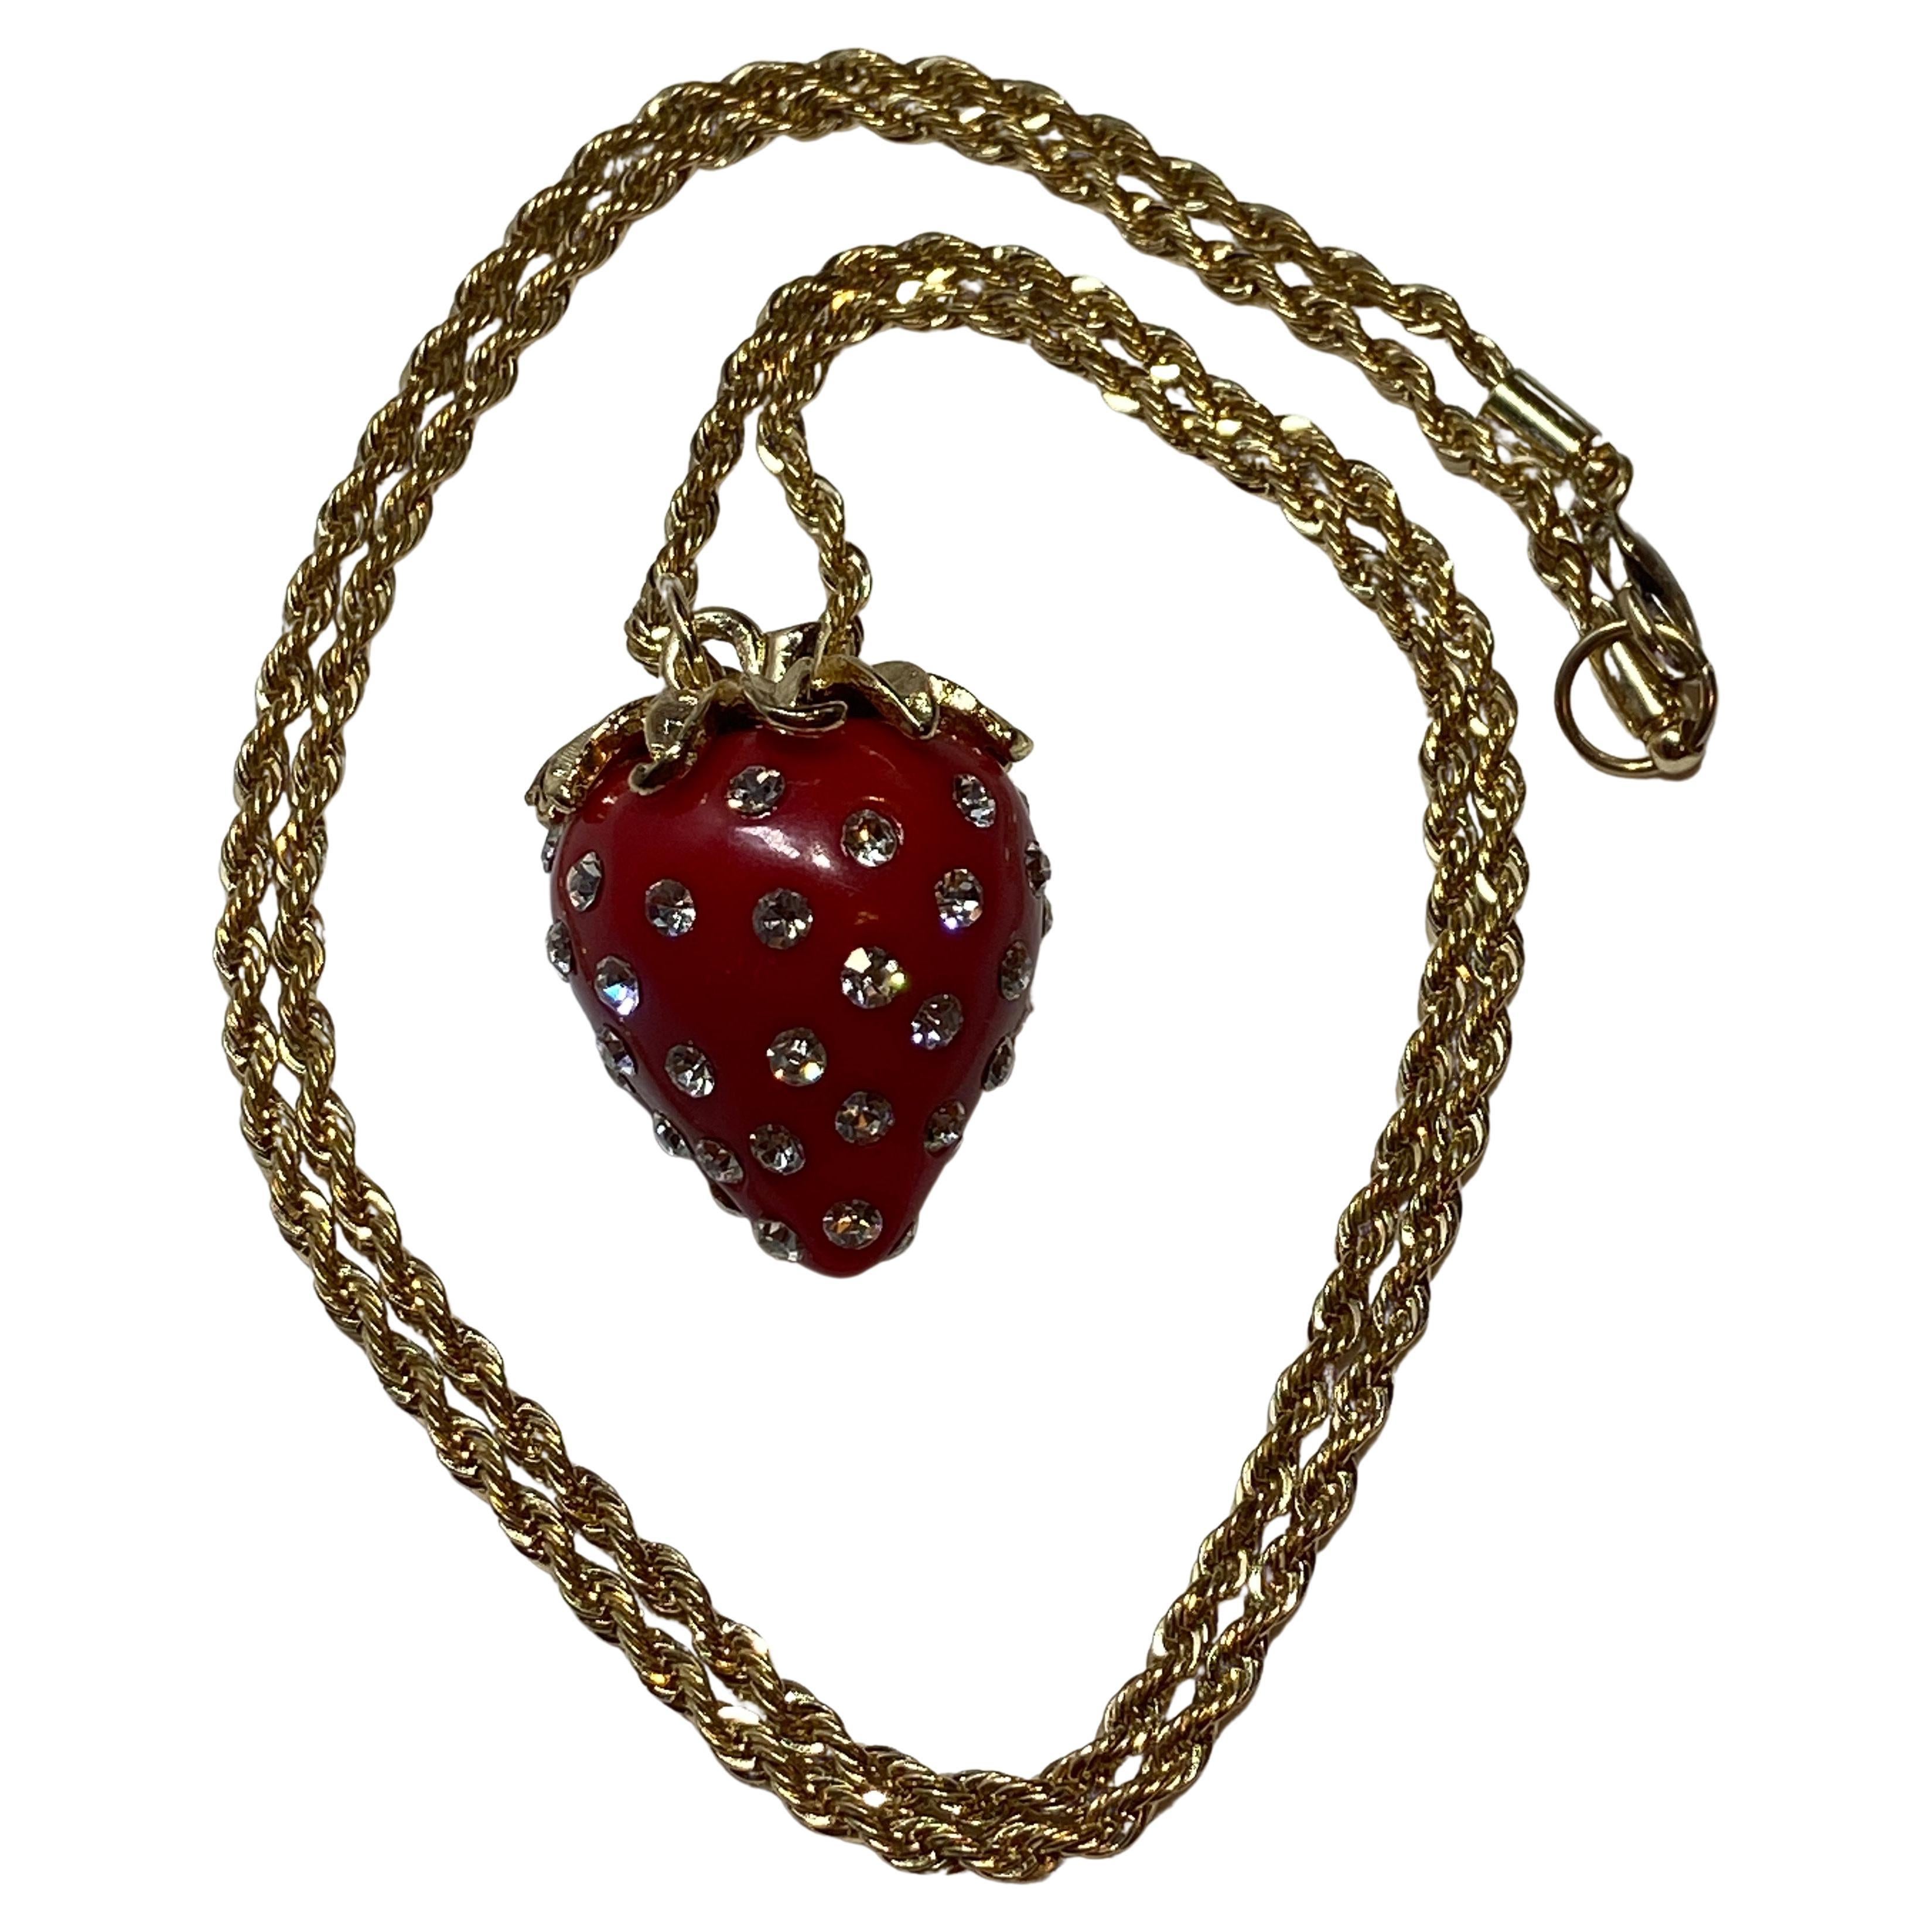 Kenneth Jay Lane Whimsical Embellished Lucite "Strawberry" Pendant & Necklace  For Sale